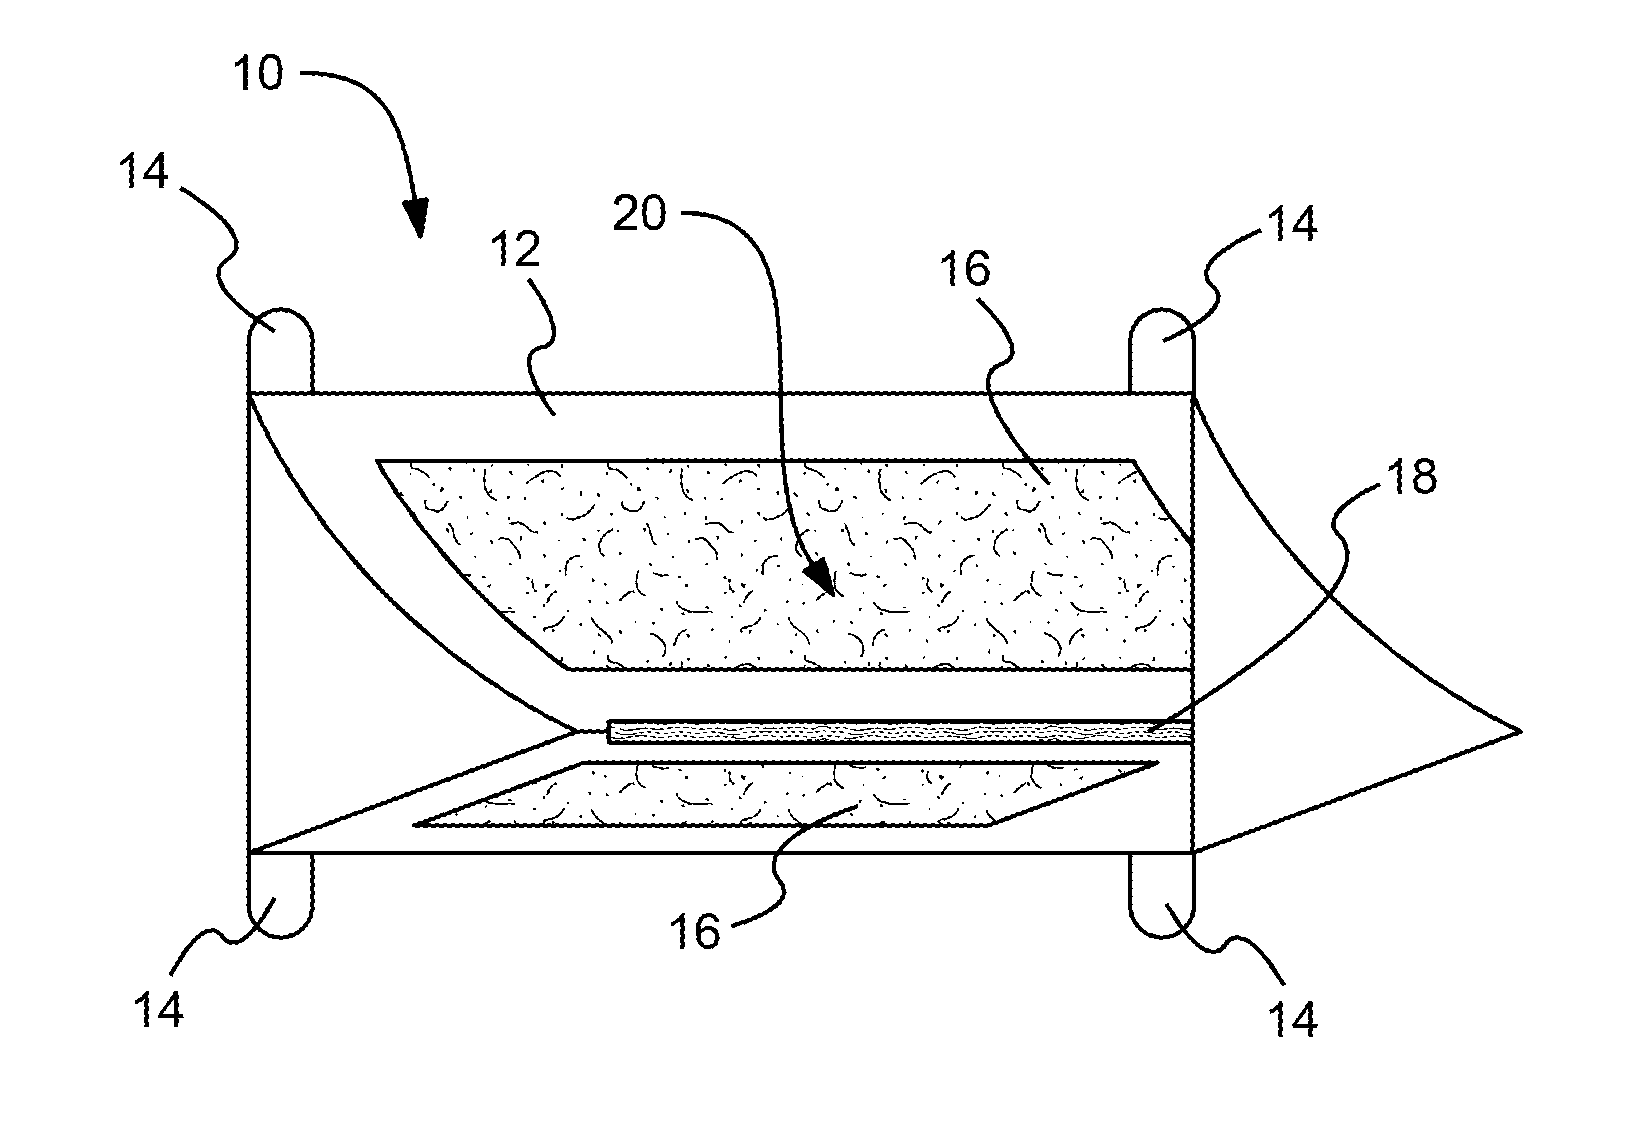 Insect trap with encapsulation system